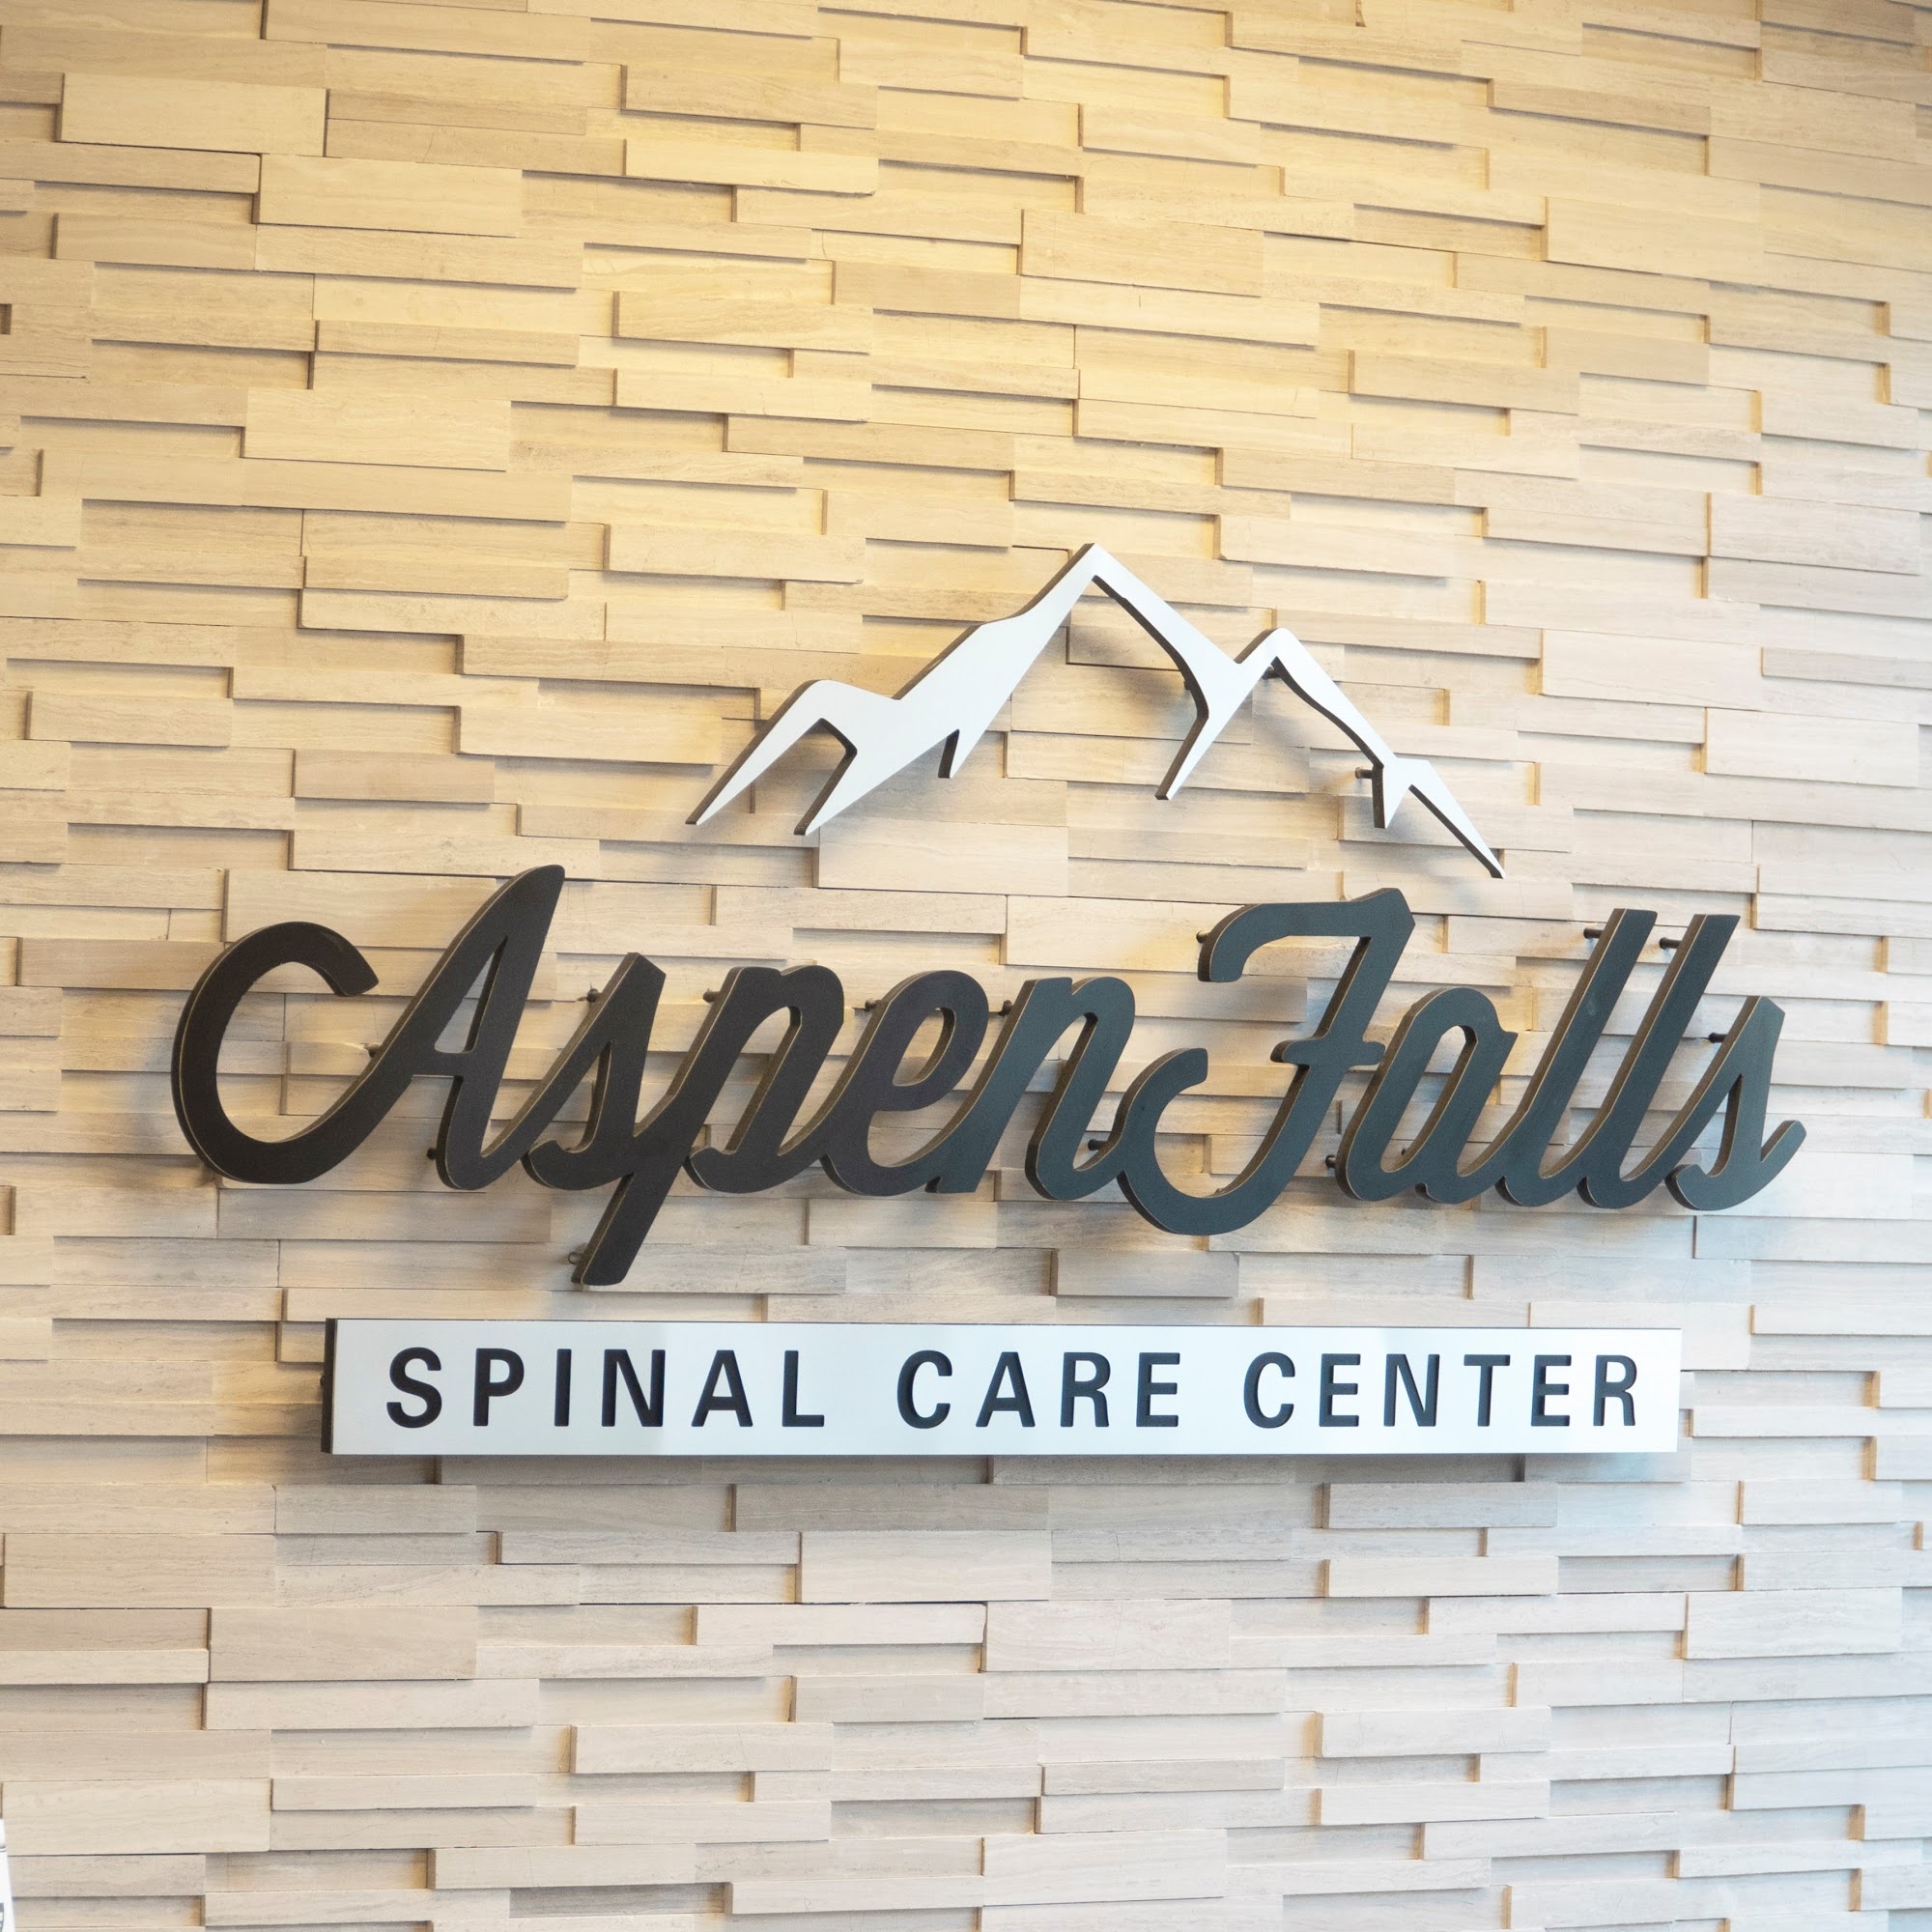 Aspen Falls Spinal Care Center & Chiropractic